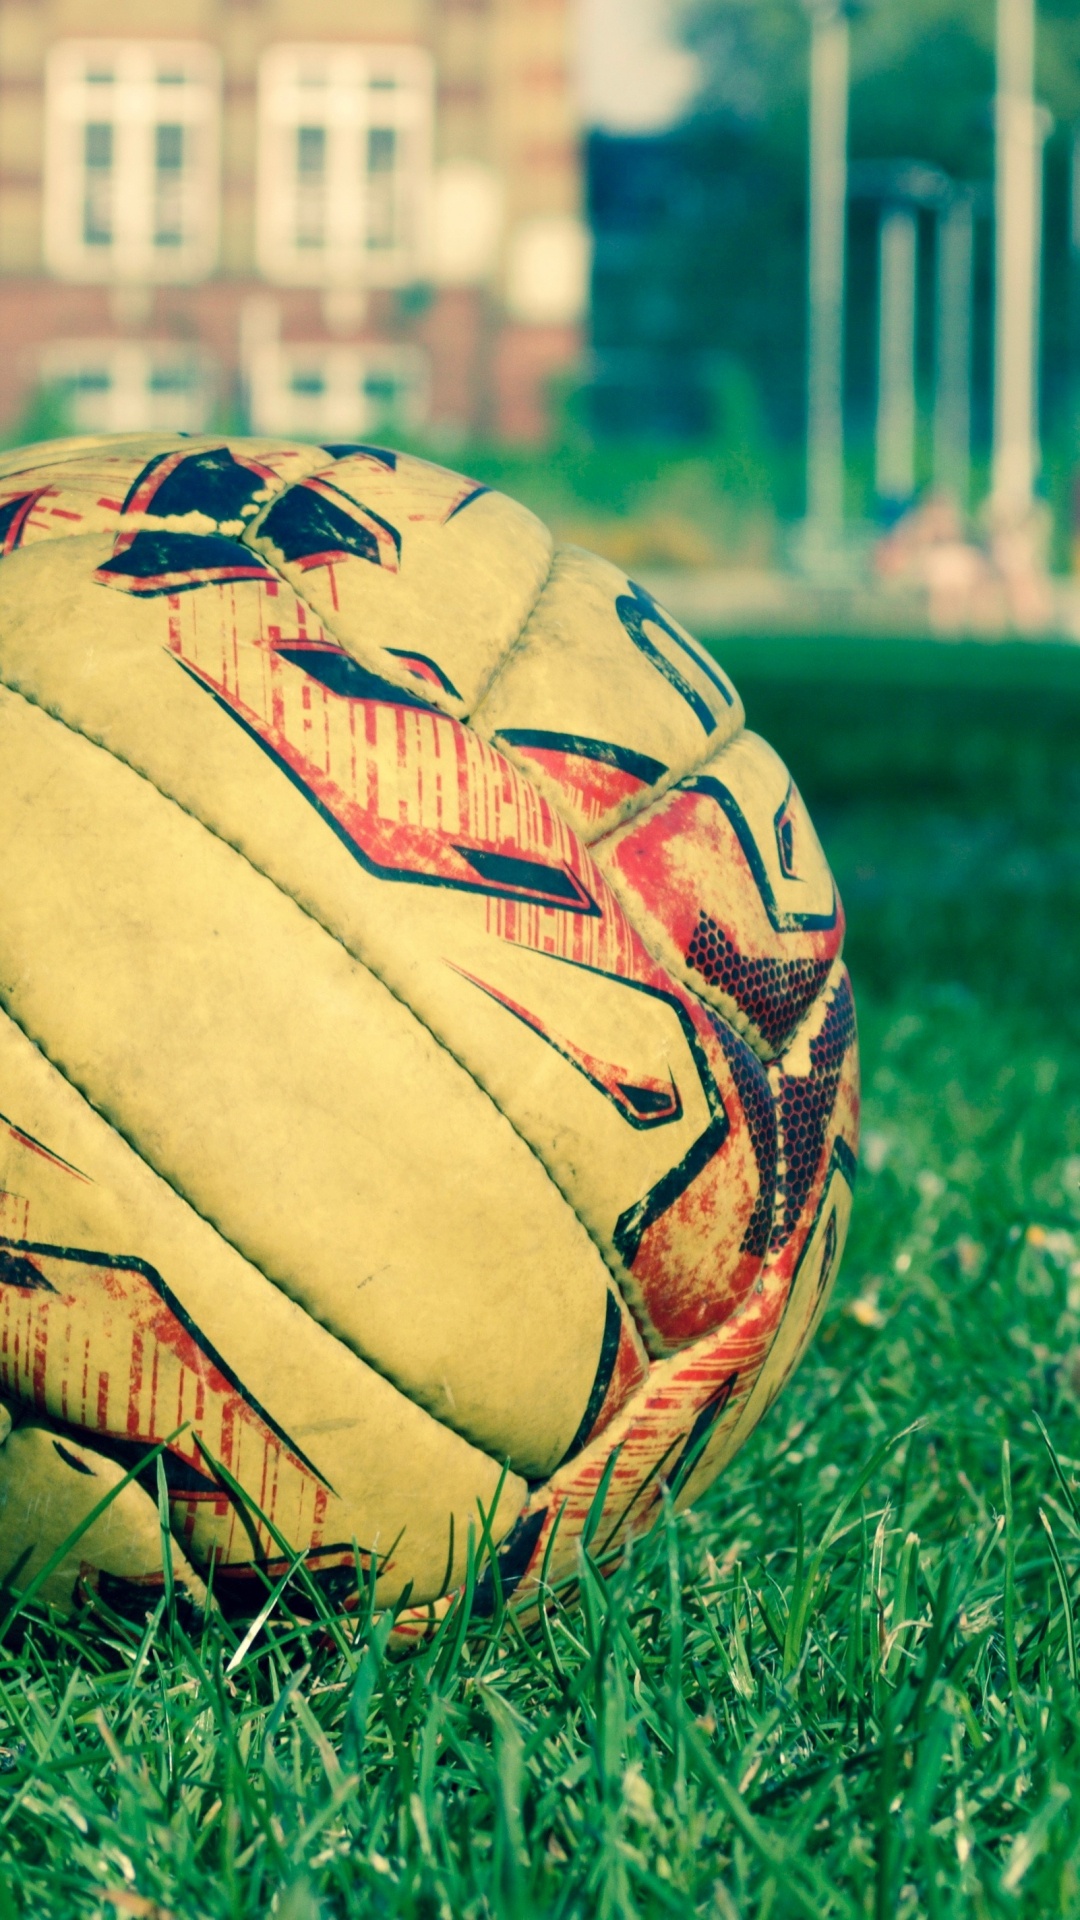 Brown and Black Soccer Ball on Green Grass Field During Daytime. Wallpaper in 1080x1920 Resolution